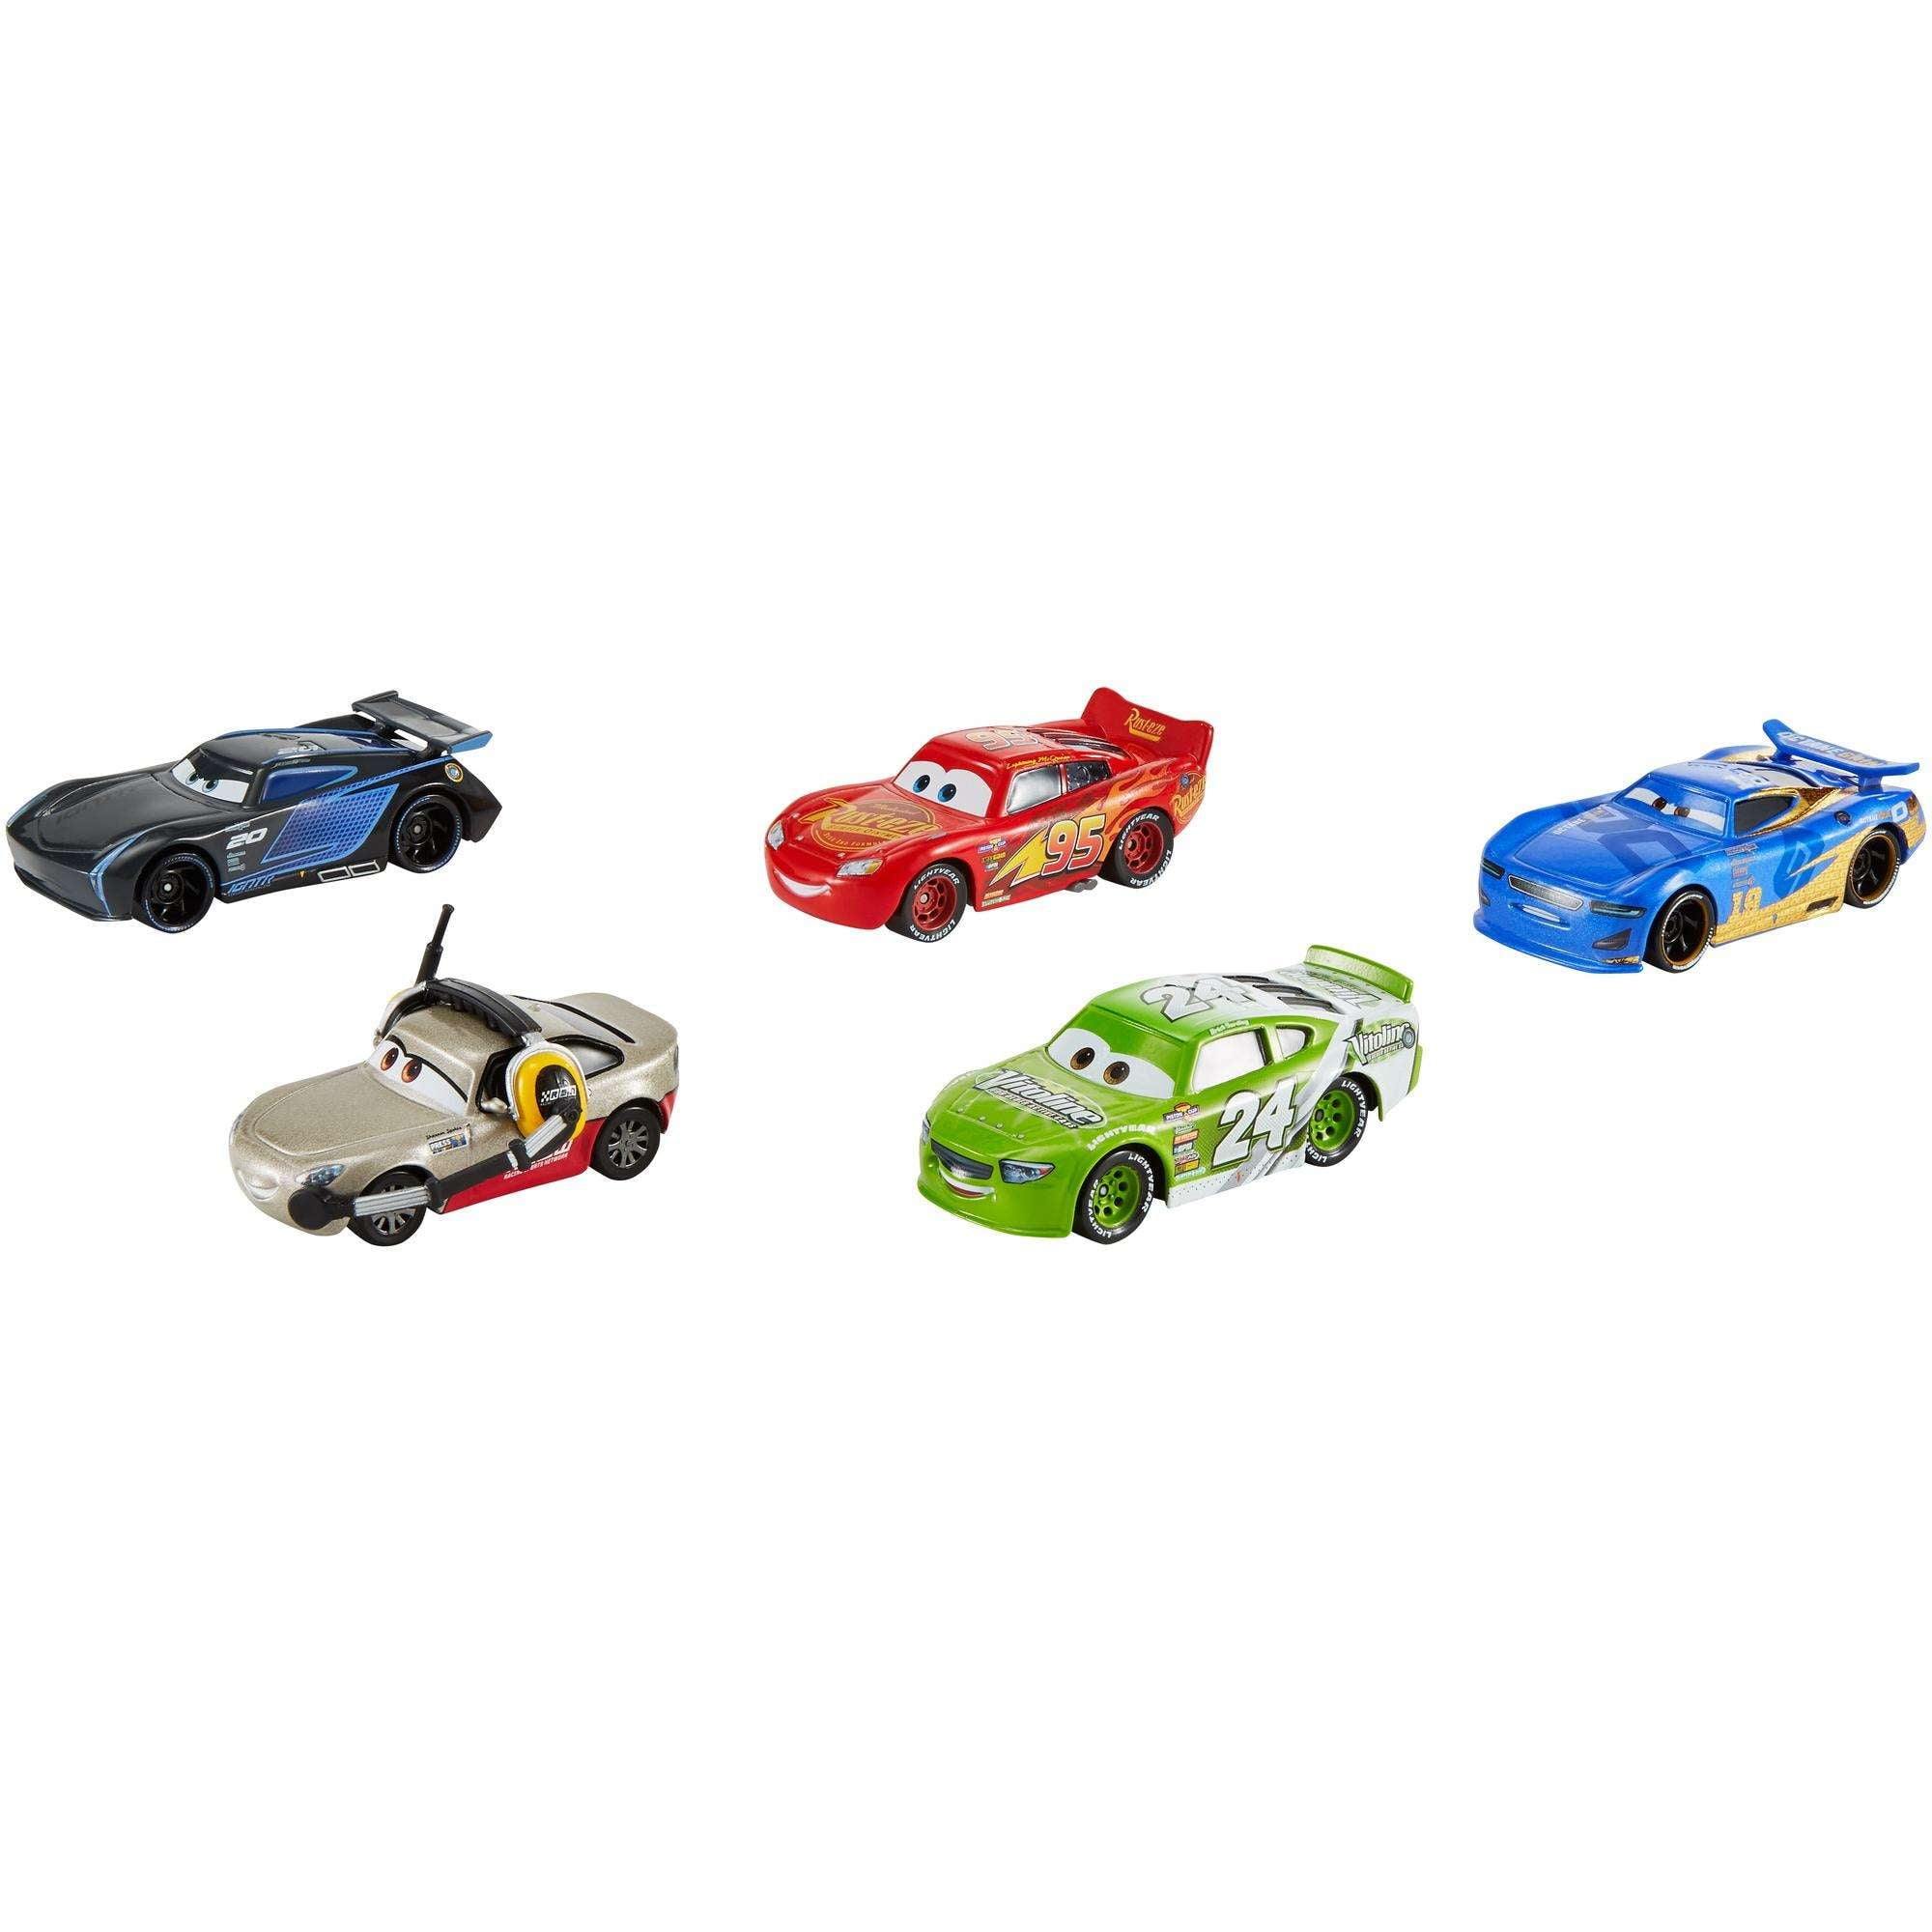 Disney Cars Toys Movie Die-cast Character Vehicles, Miniature, Collectible  Racecar Automobile Toys Based on Cars Movies, for Kids Age 3 and Older